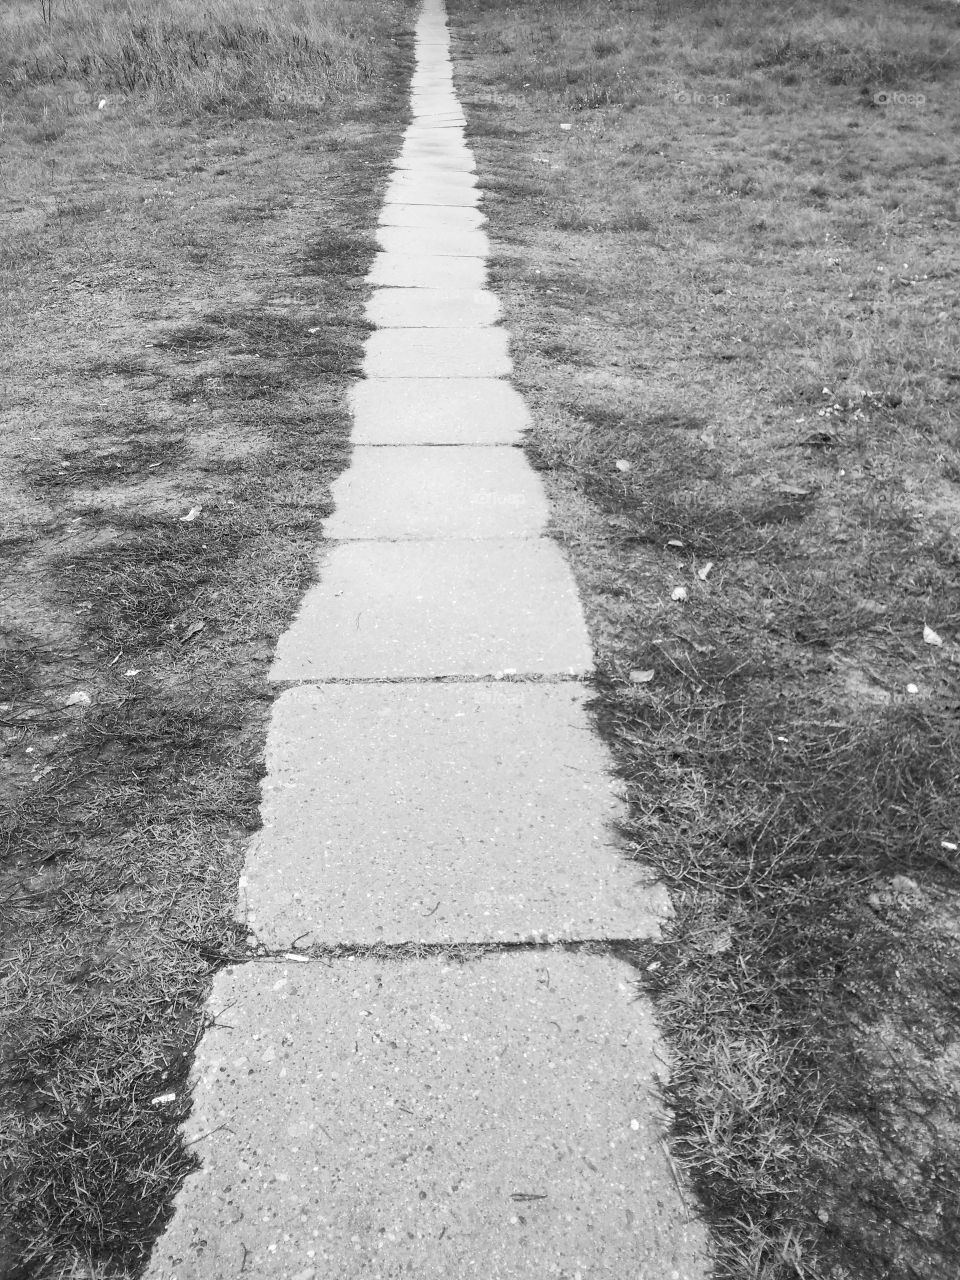 Old Concrete Tile Road Track On The Grass Field